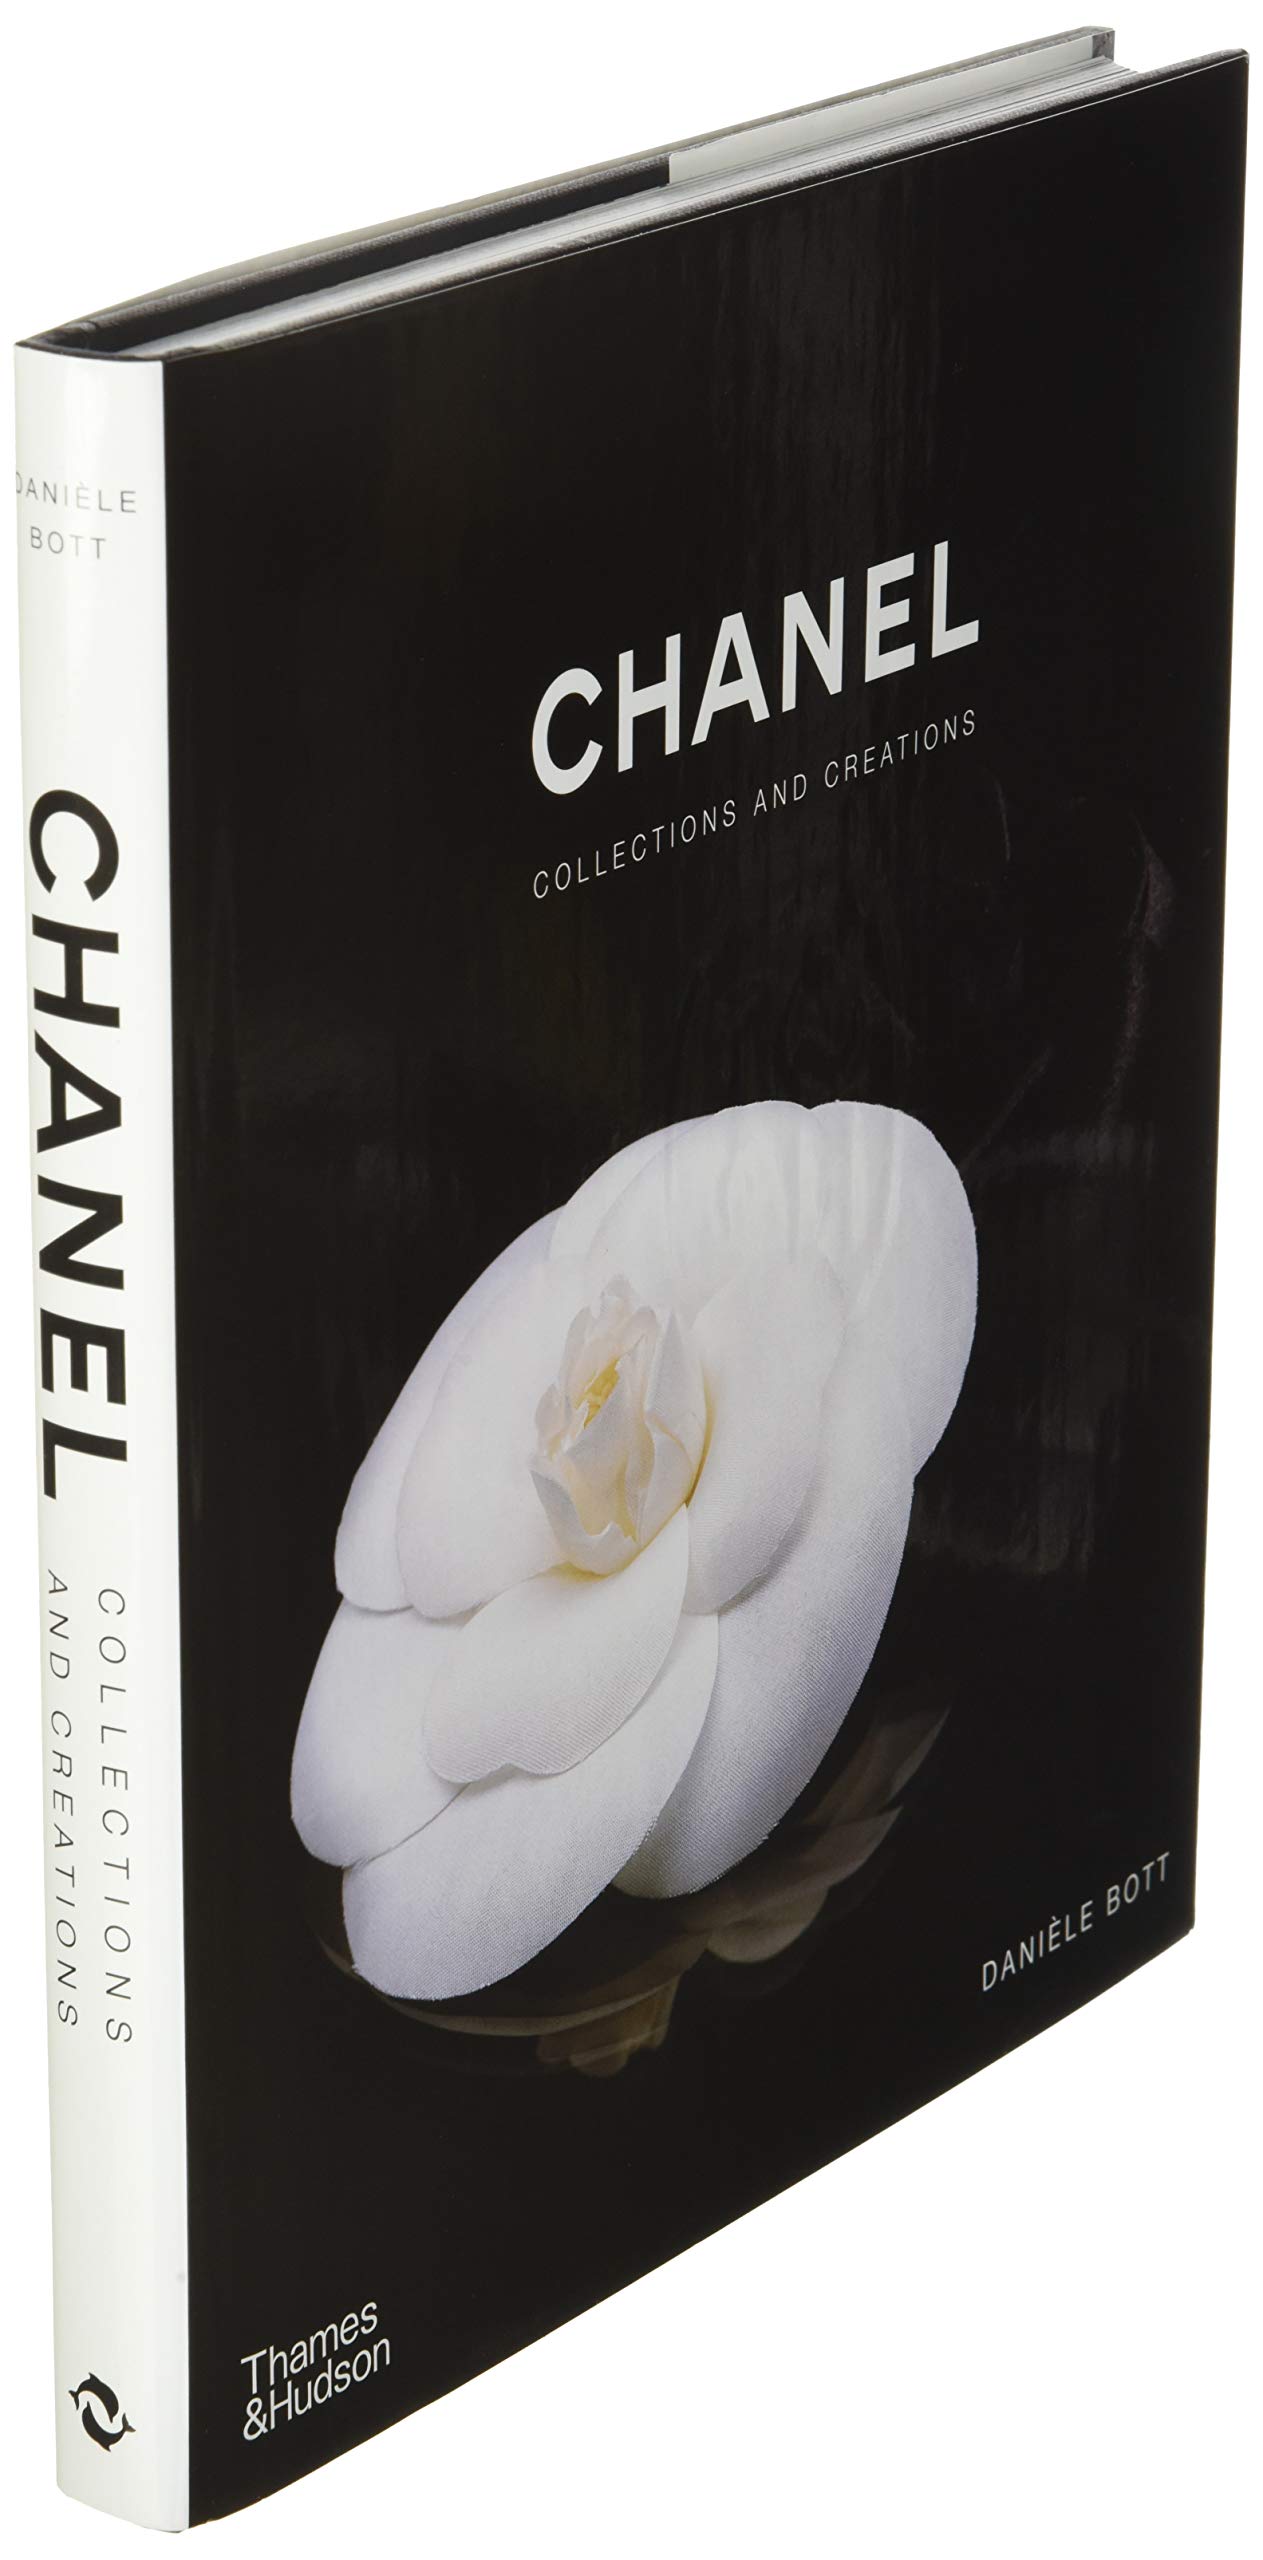 Chanel 3Book Slipcase New Edition Coffee Table Book  ASSOULINE